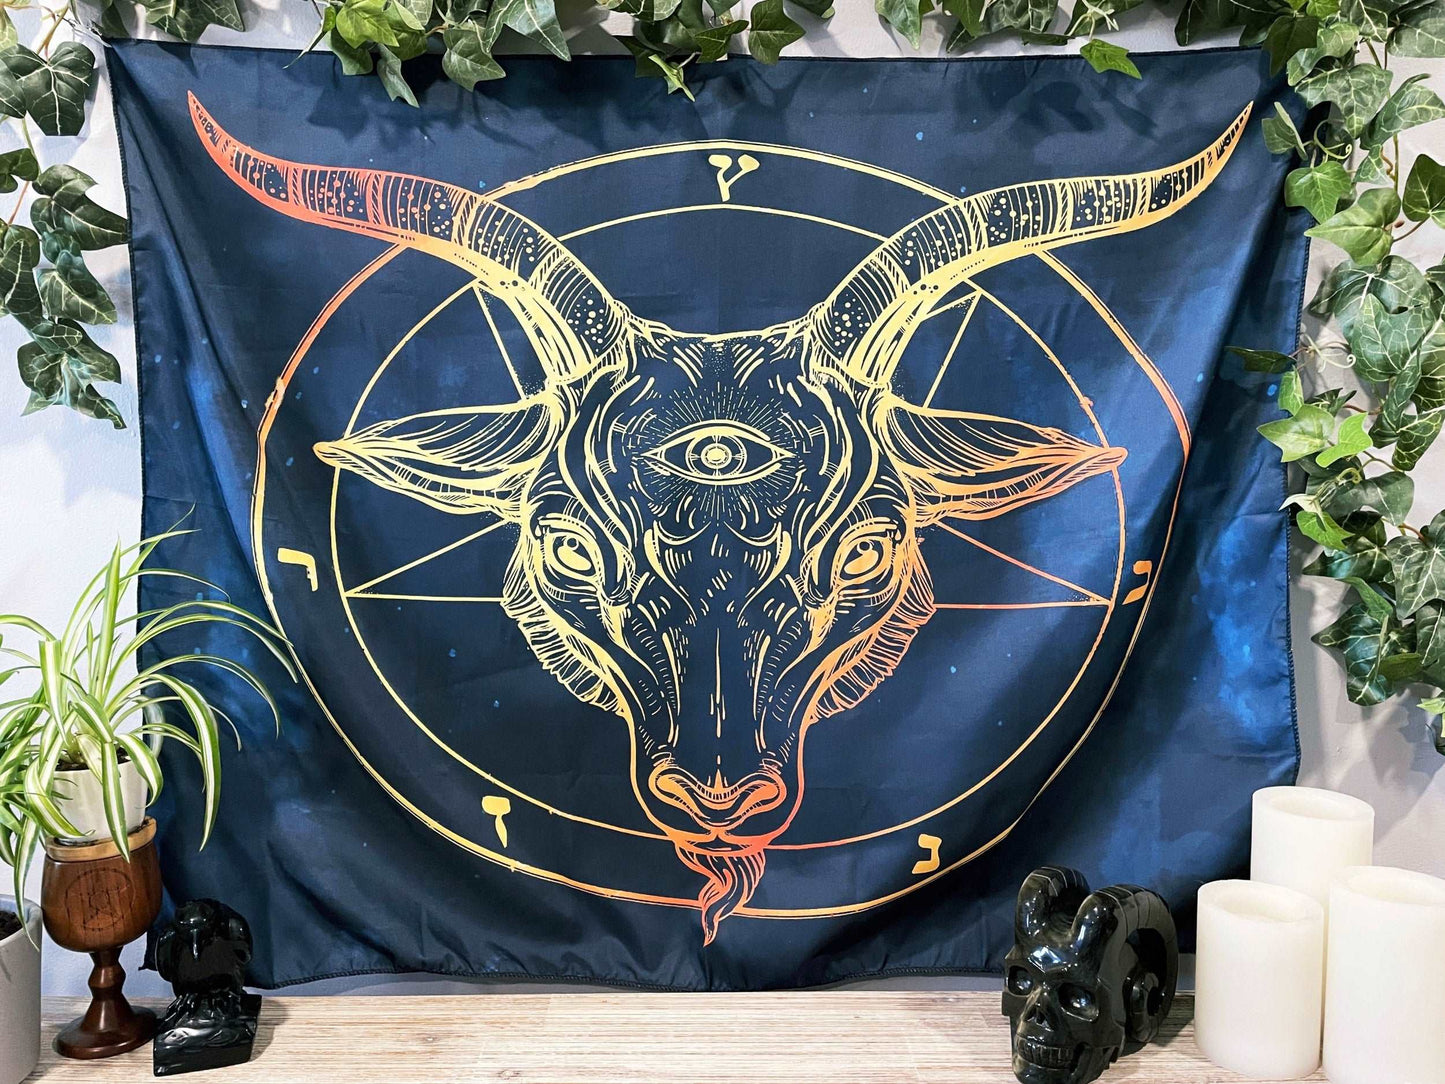 Pictured is a large wall tapestry with a dark blue background and an image of baphomet printed in yellow and orange.